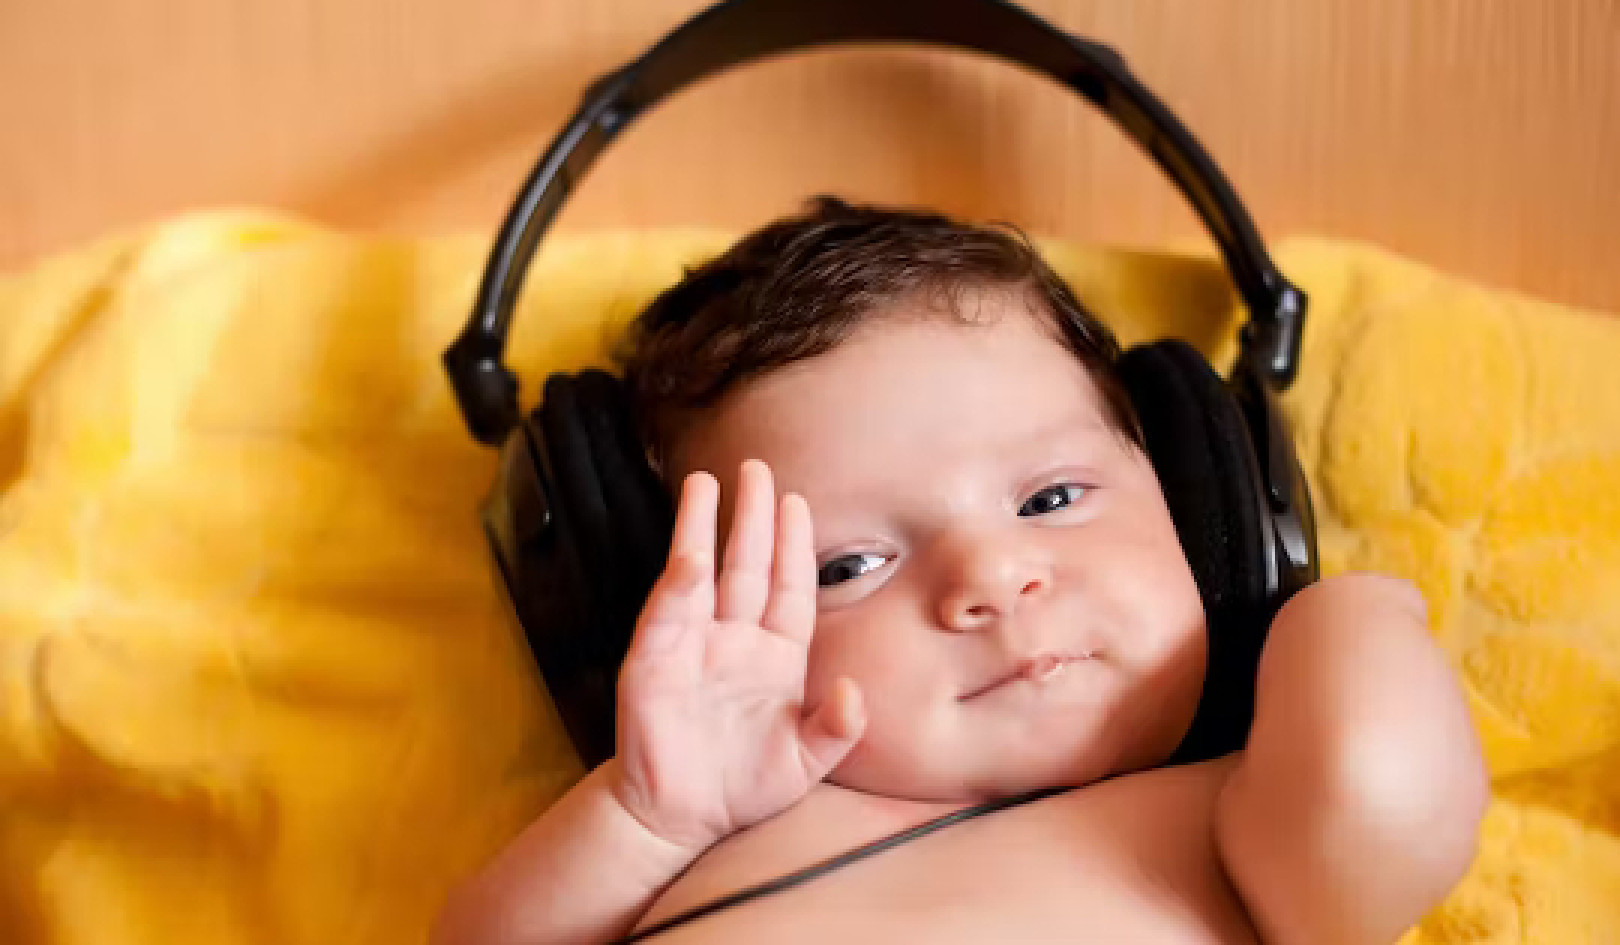 Why Happy Music Soothes Newborns